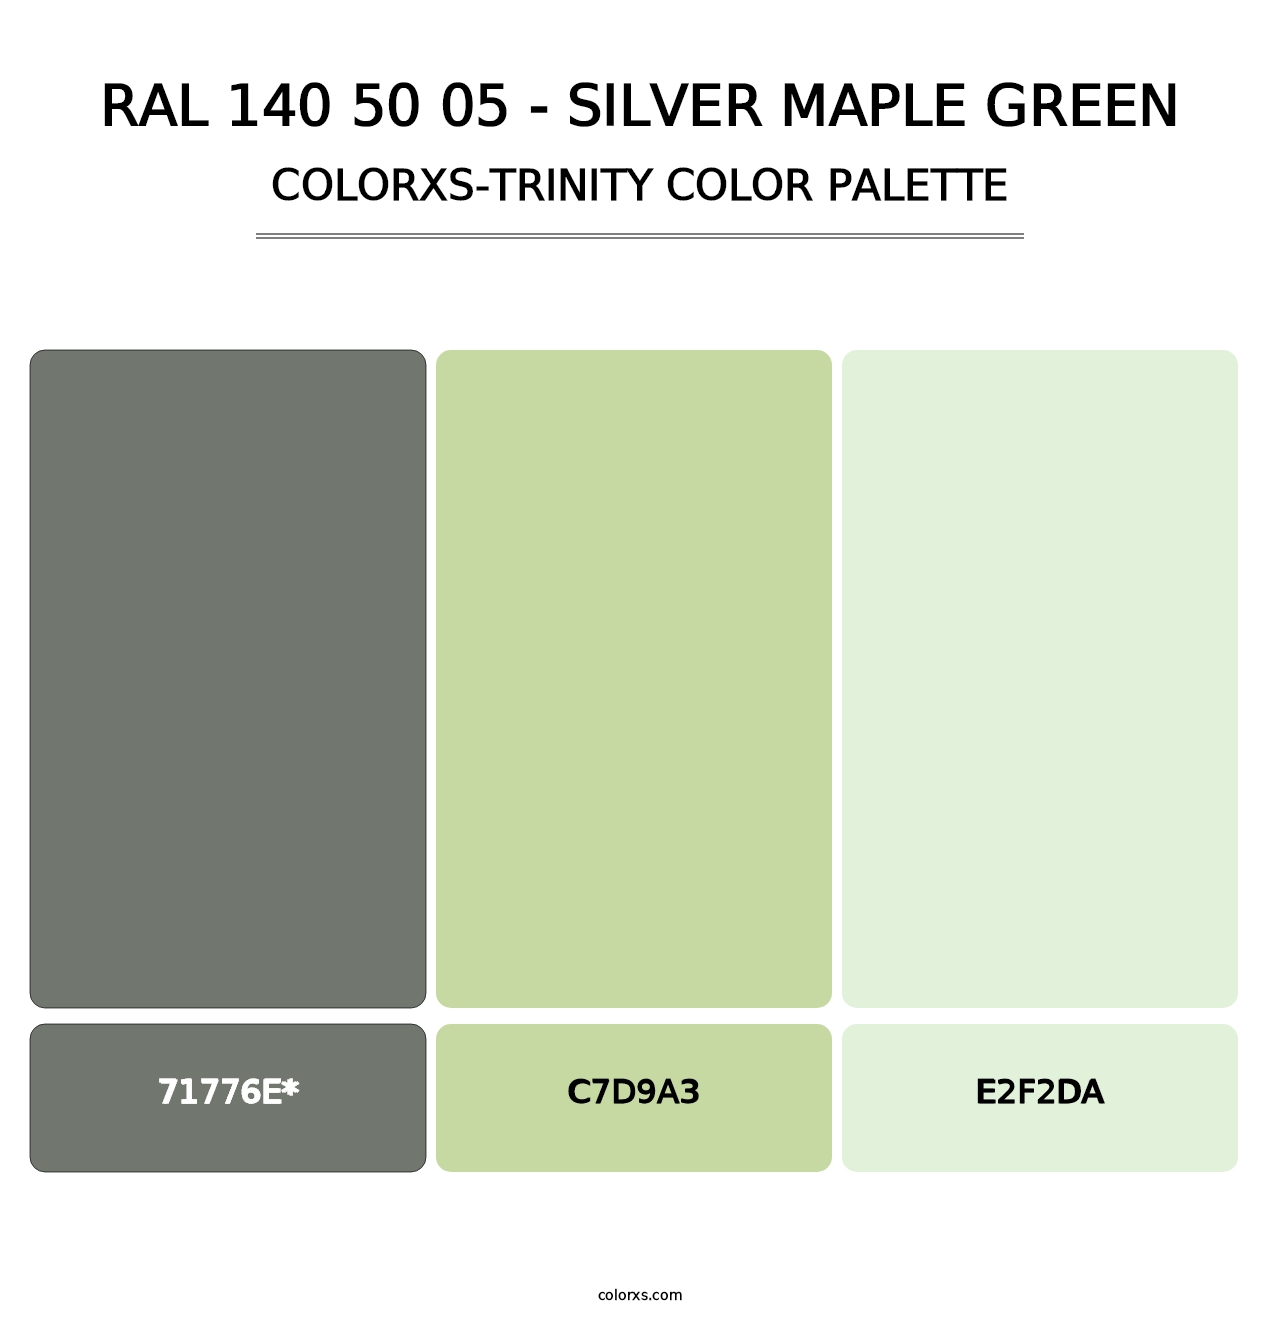 RAL 140 50 05 - Silver Maple Green - Colorxs Trinity Palette